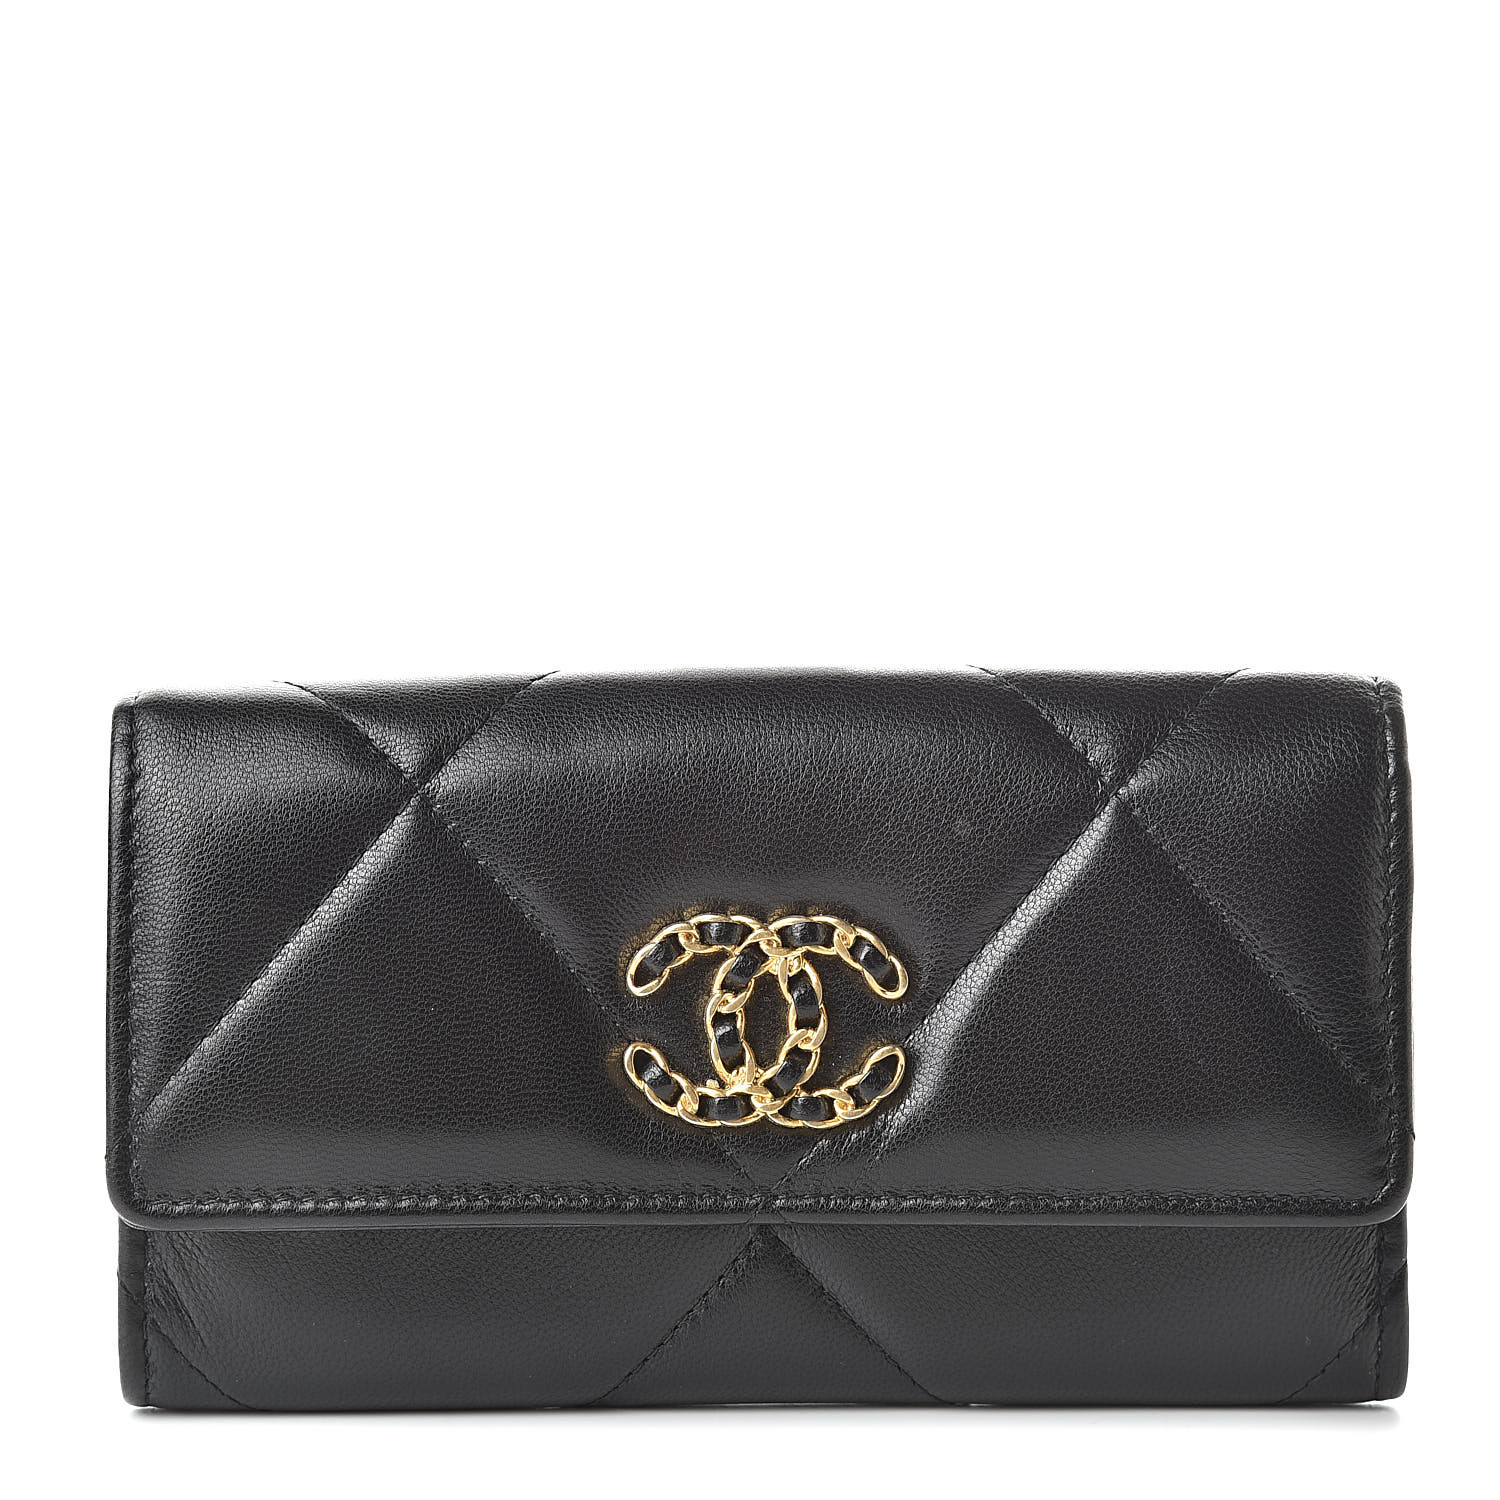 CHANEL Goatskin Quilted Chanel 19 Flap Wallet Black 509162